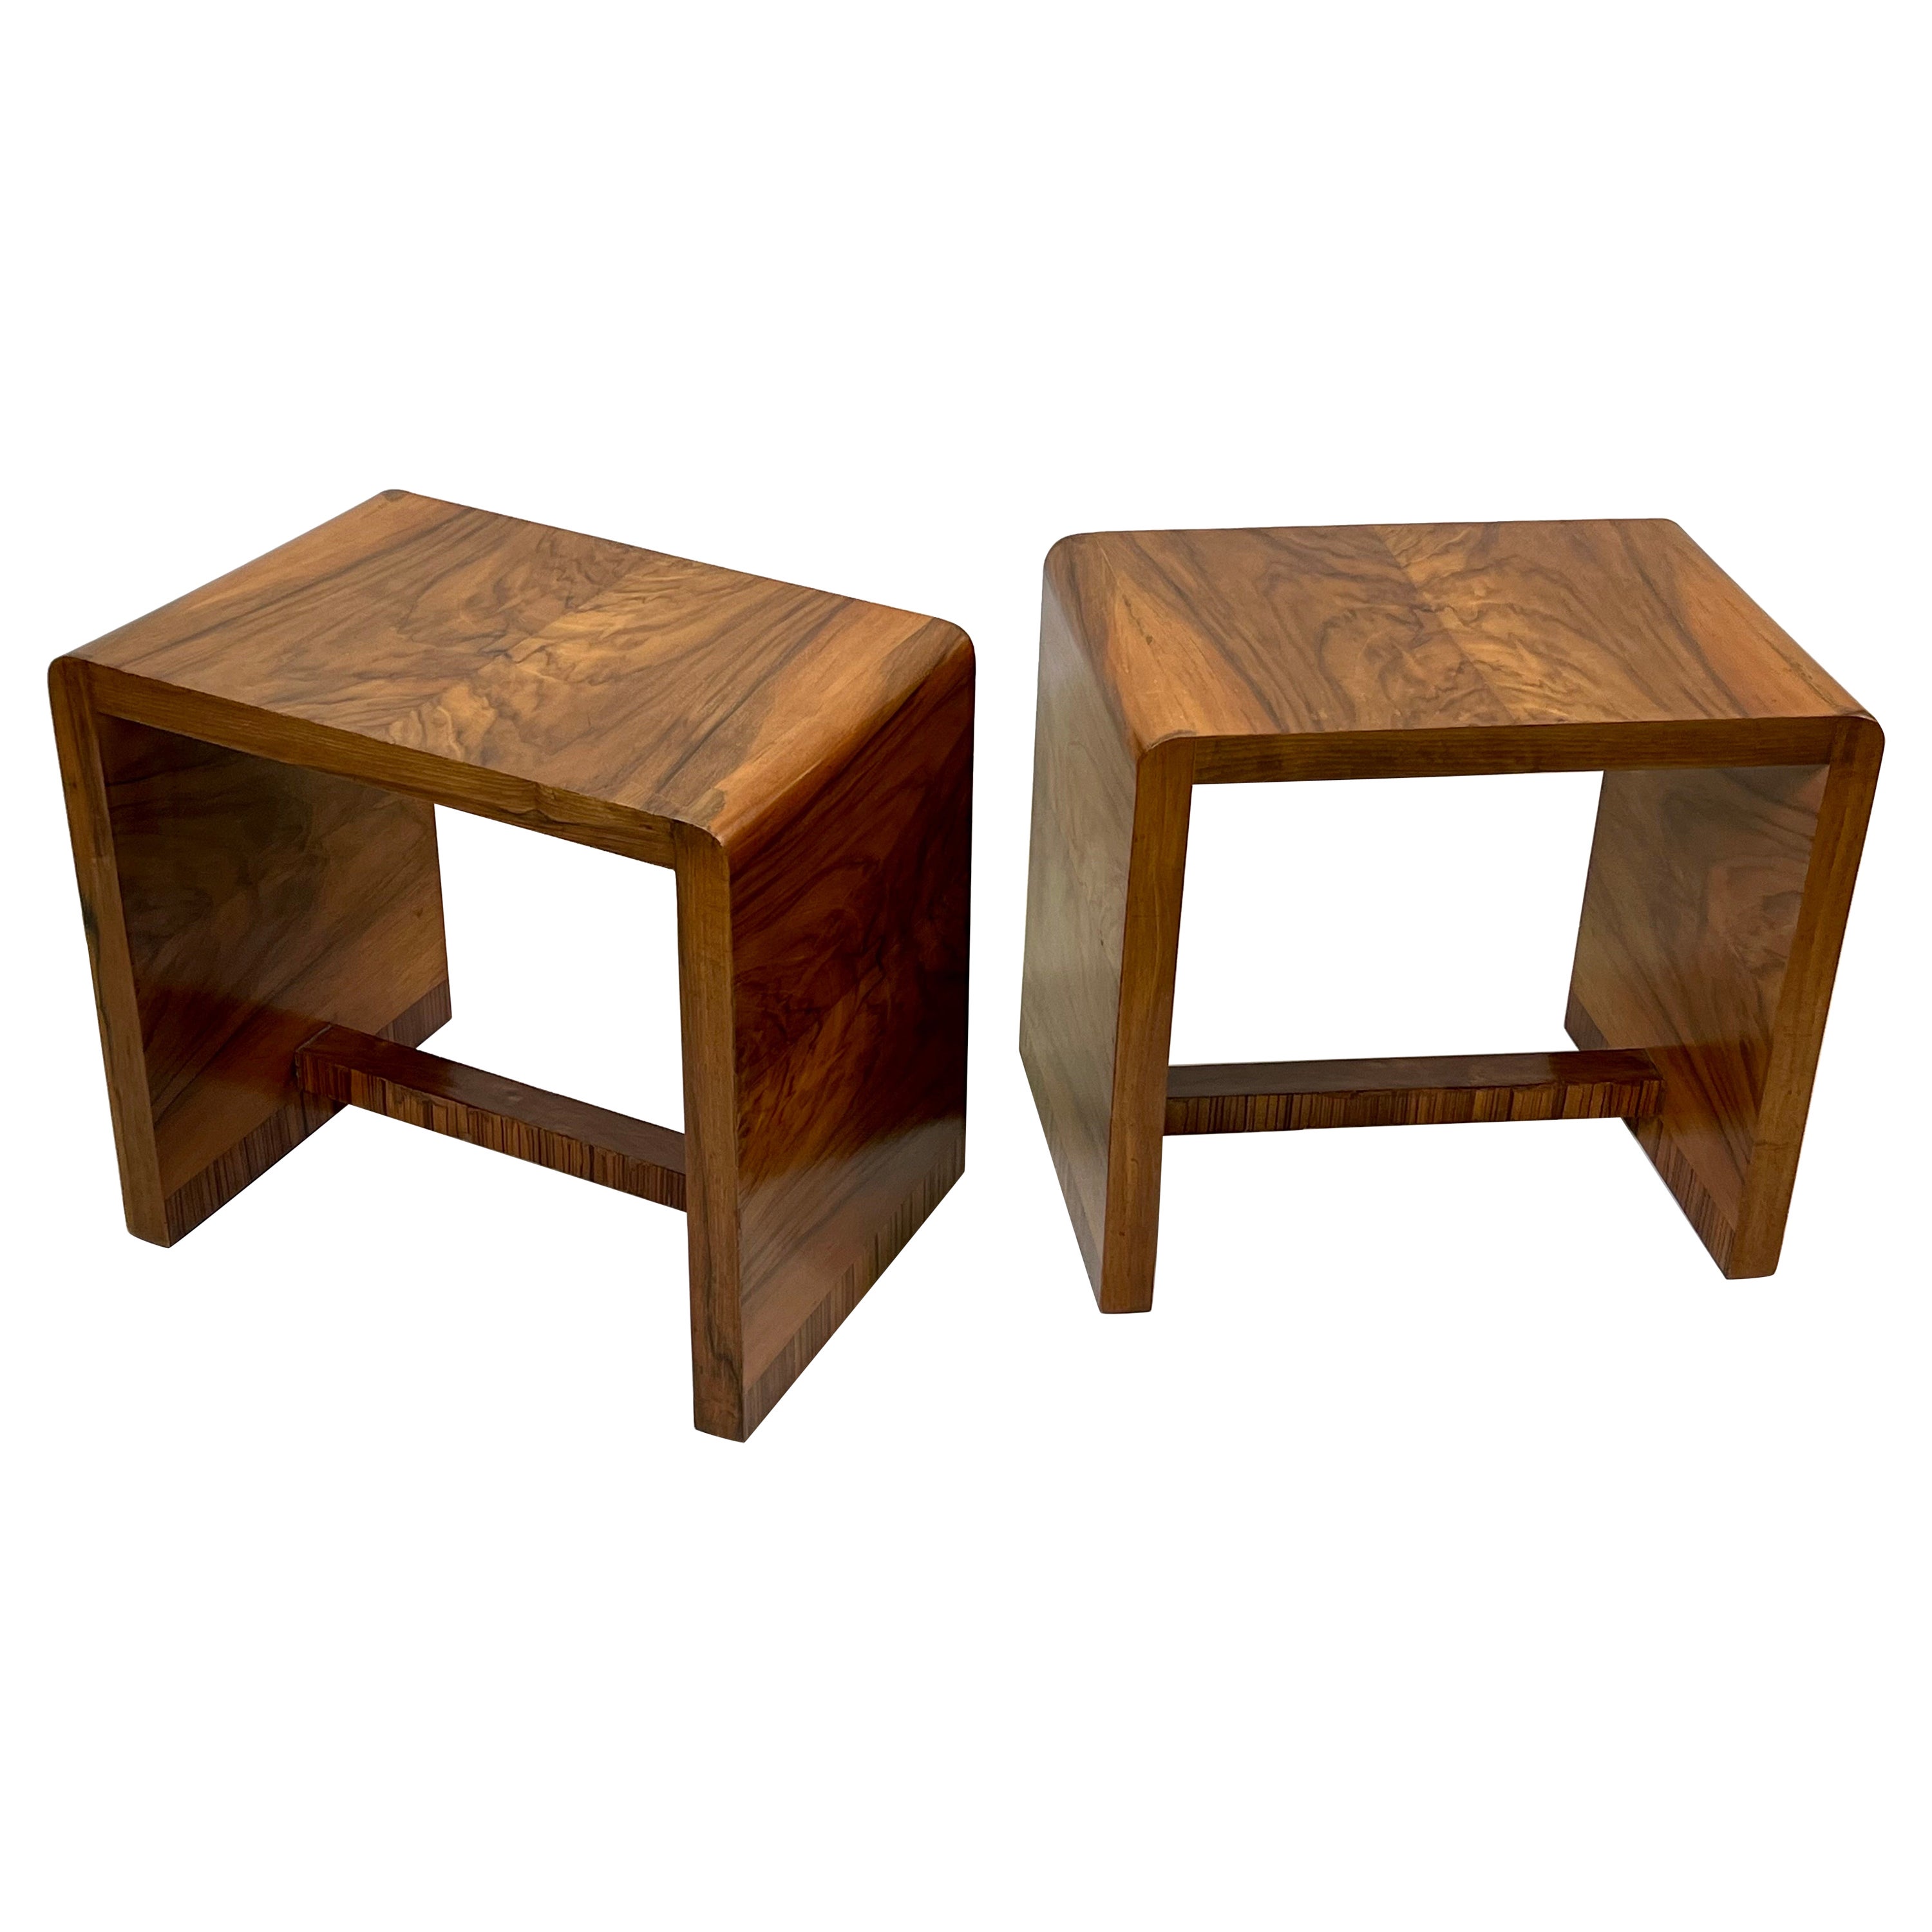 Pair Italian Mid-century Modern Rationalist Elm Wood Benches, Giuseppe Pagano  For Sale